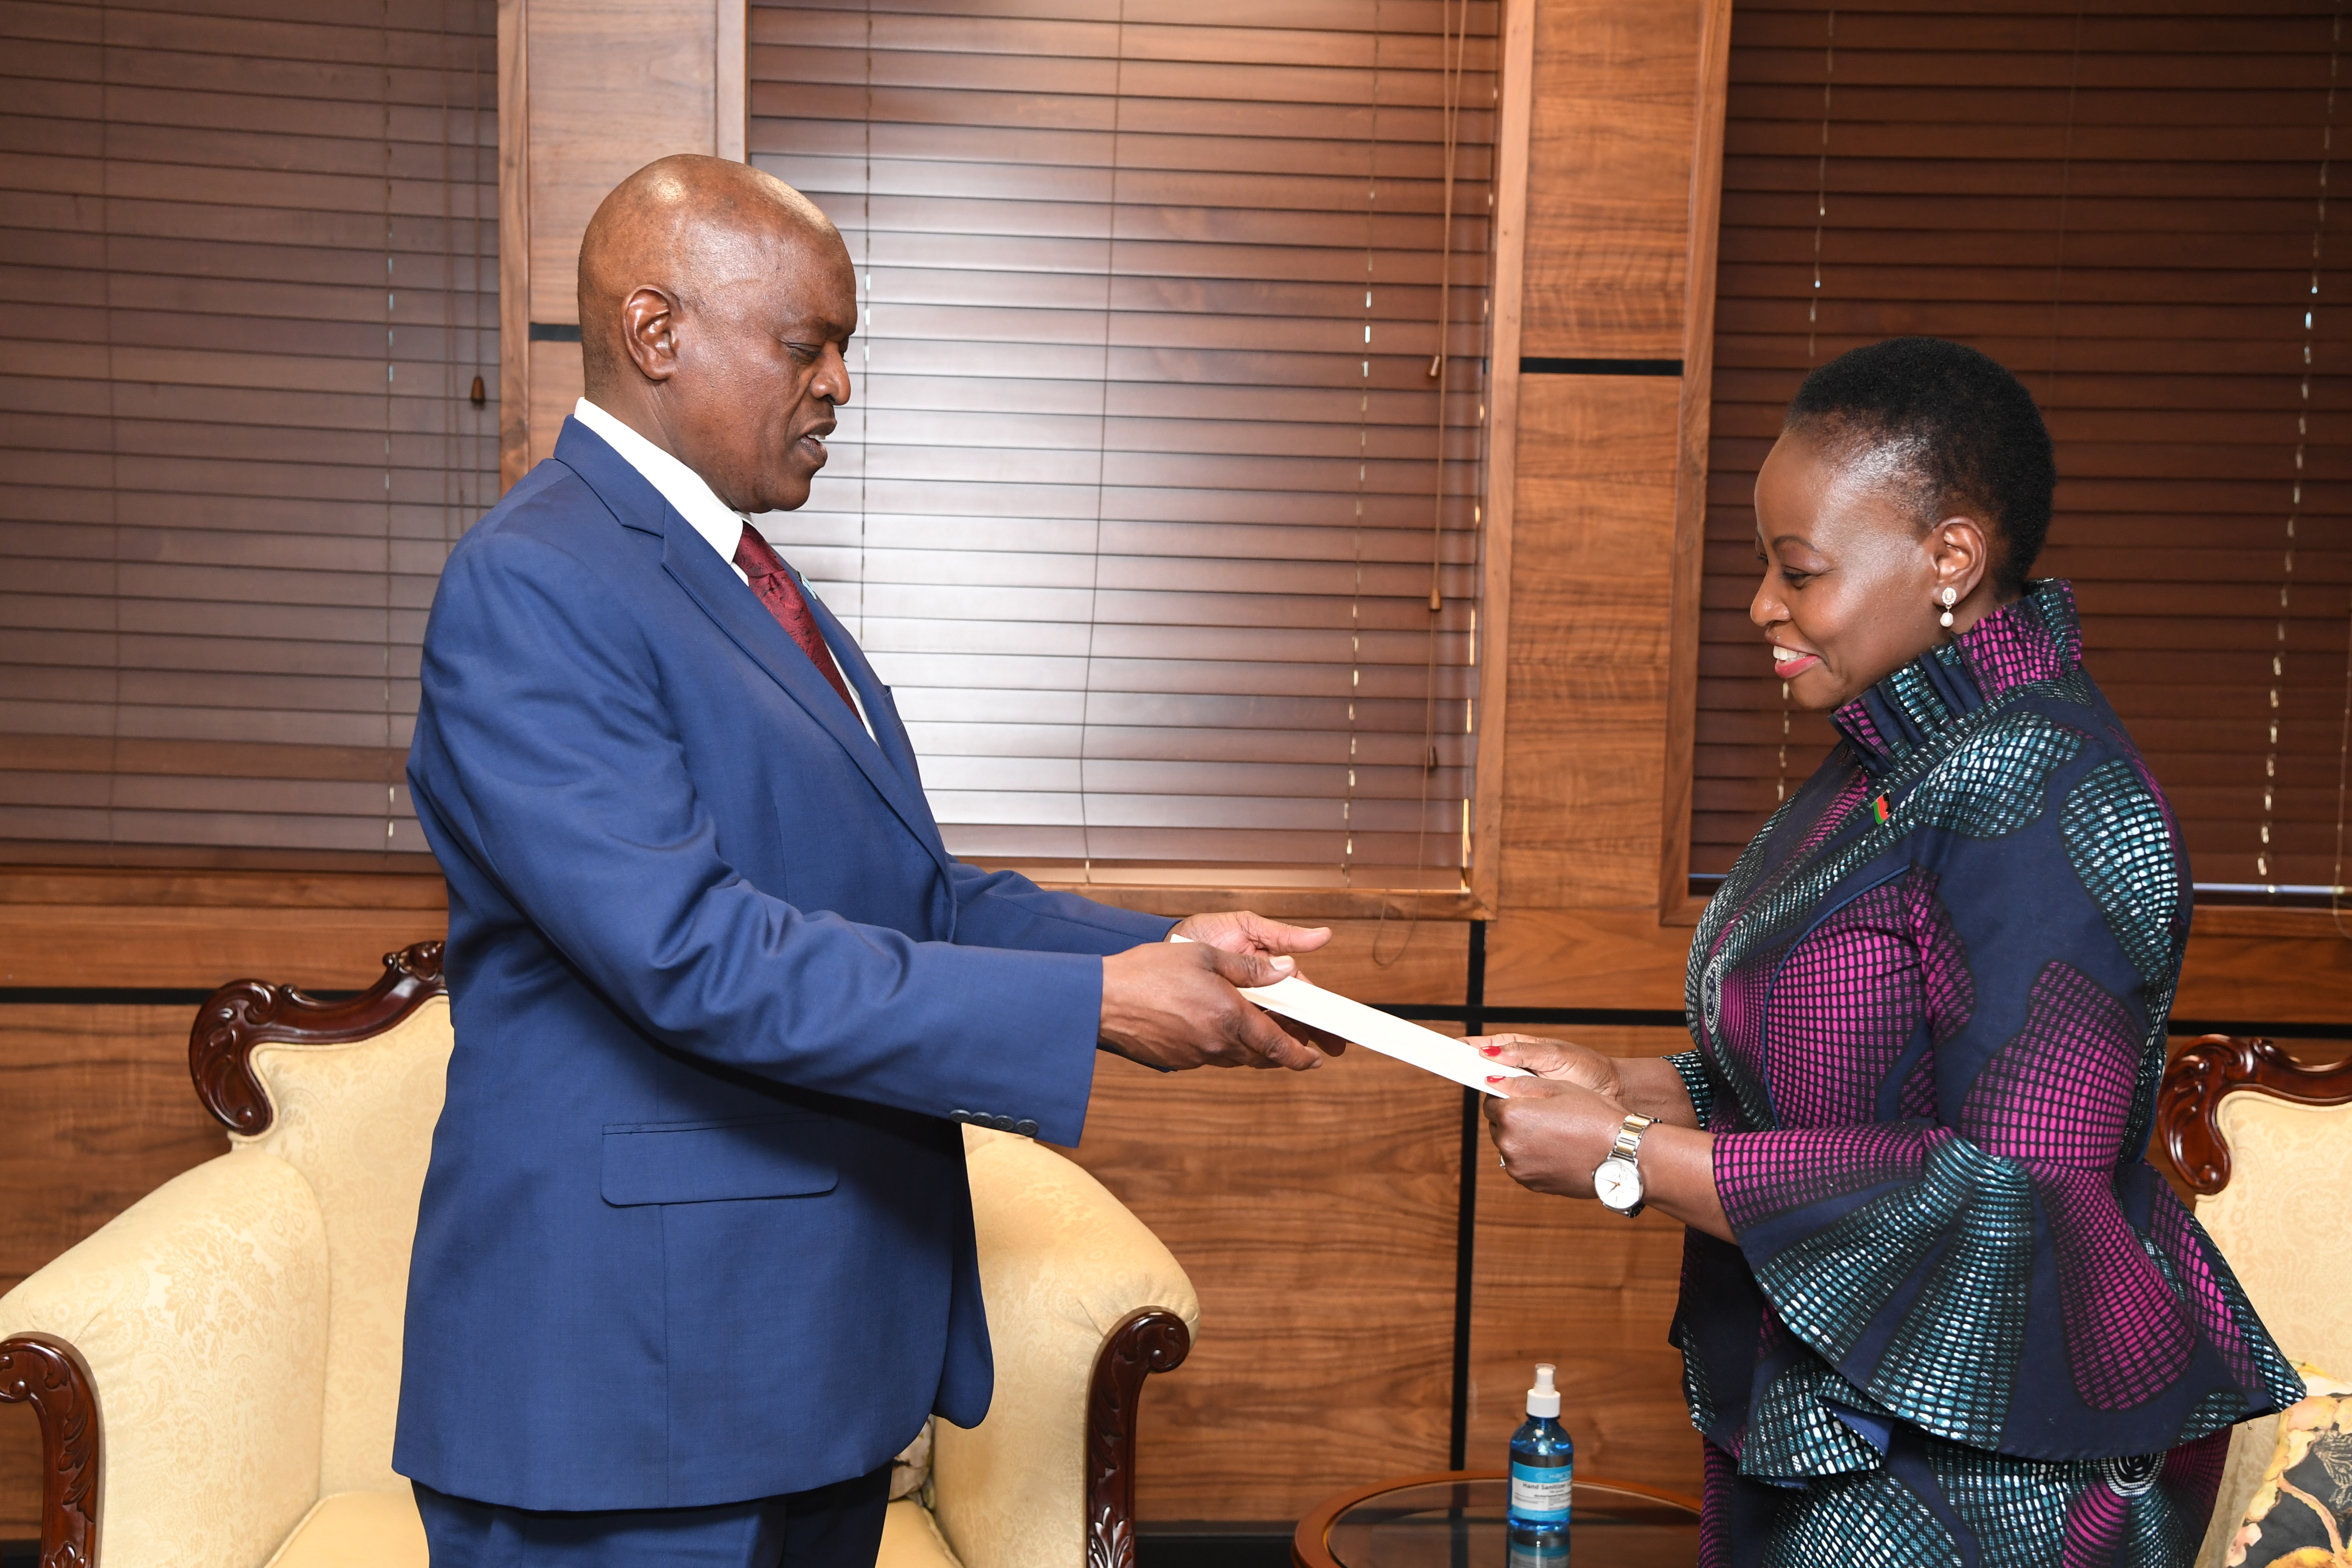 Her Excellency Mrs. Stella Ndau, Malawi High Commissioner to Botswana with residence in South Africa, on Tuesday, 20th June, 2023, presented her Letters of Credence to His Excellency Dr. Mokgweetsi E.K Masisi, President of the Republic of Botswana